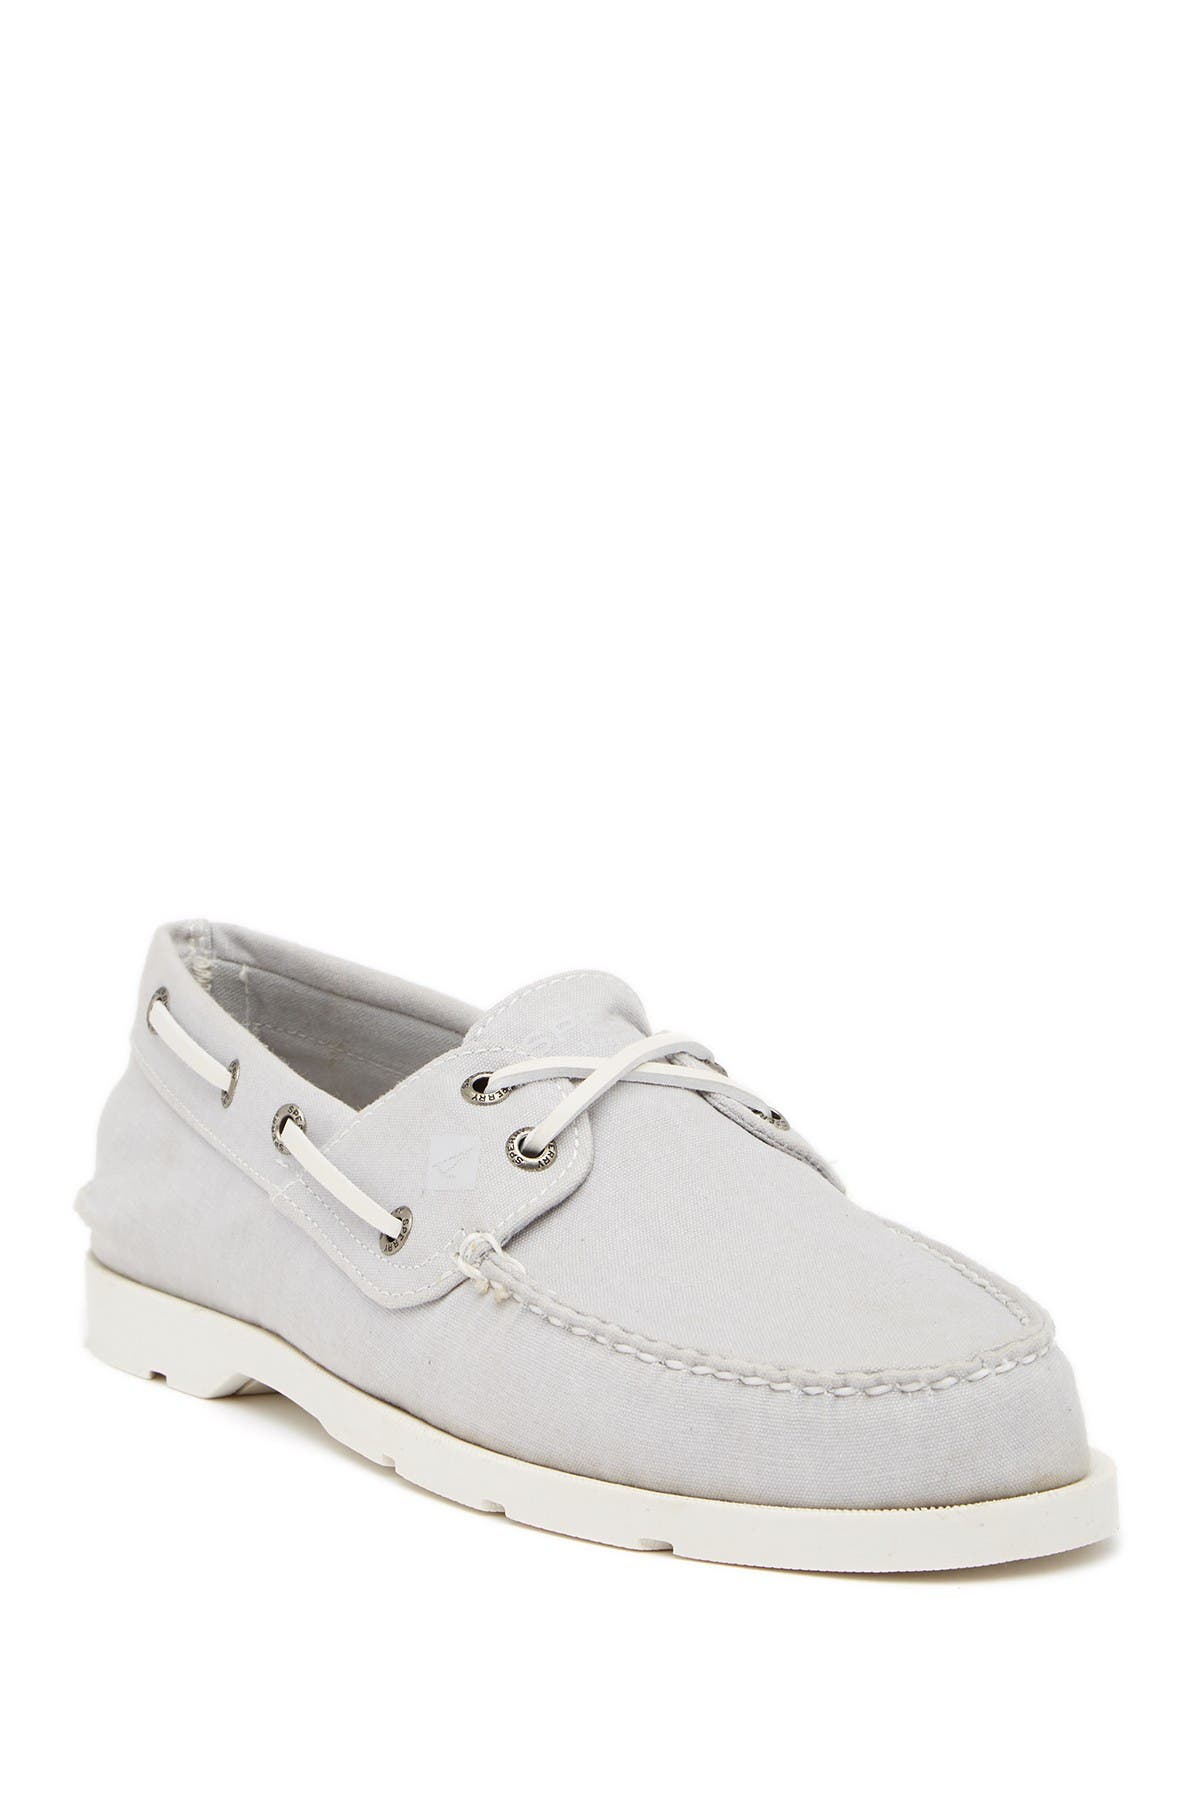 sperry boat shoes nordstrom rack